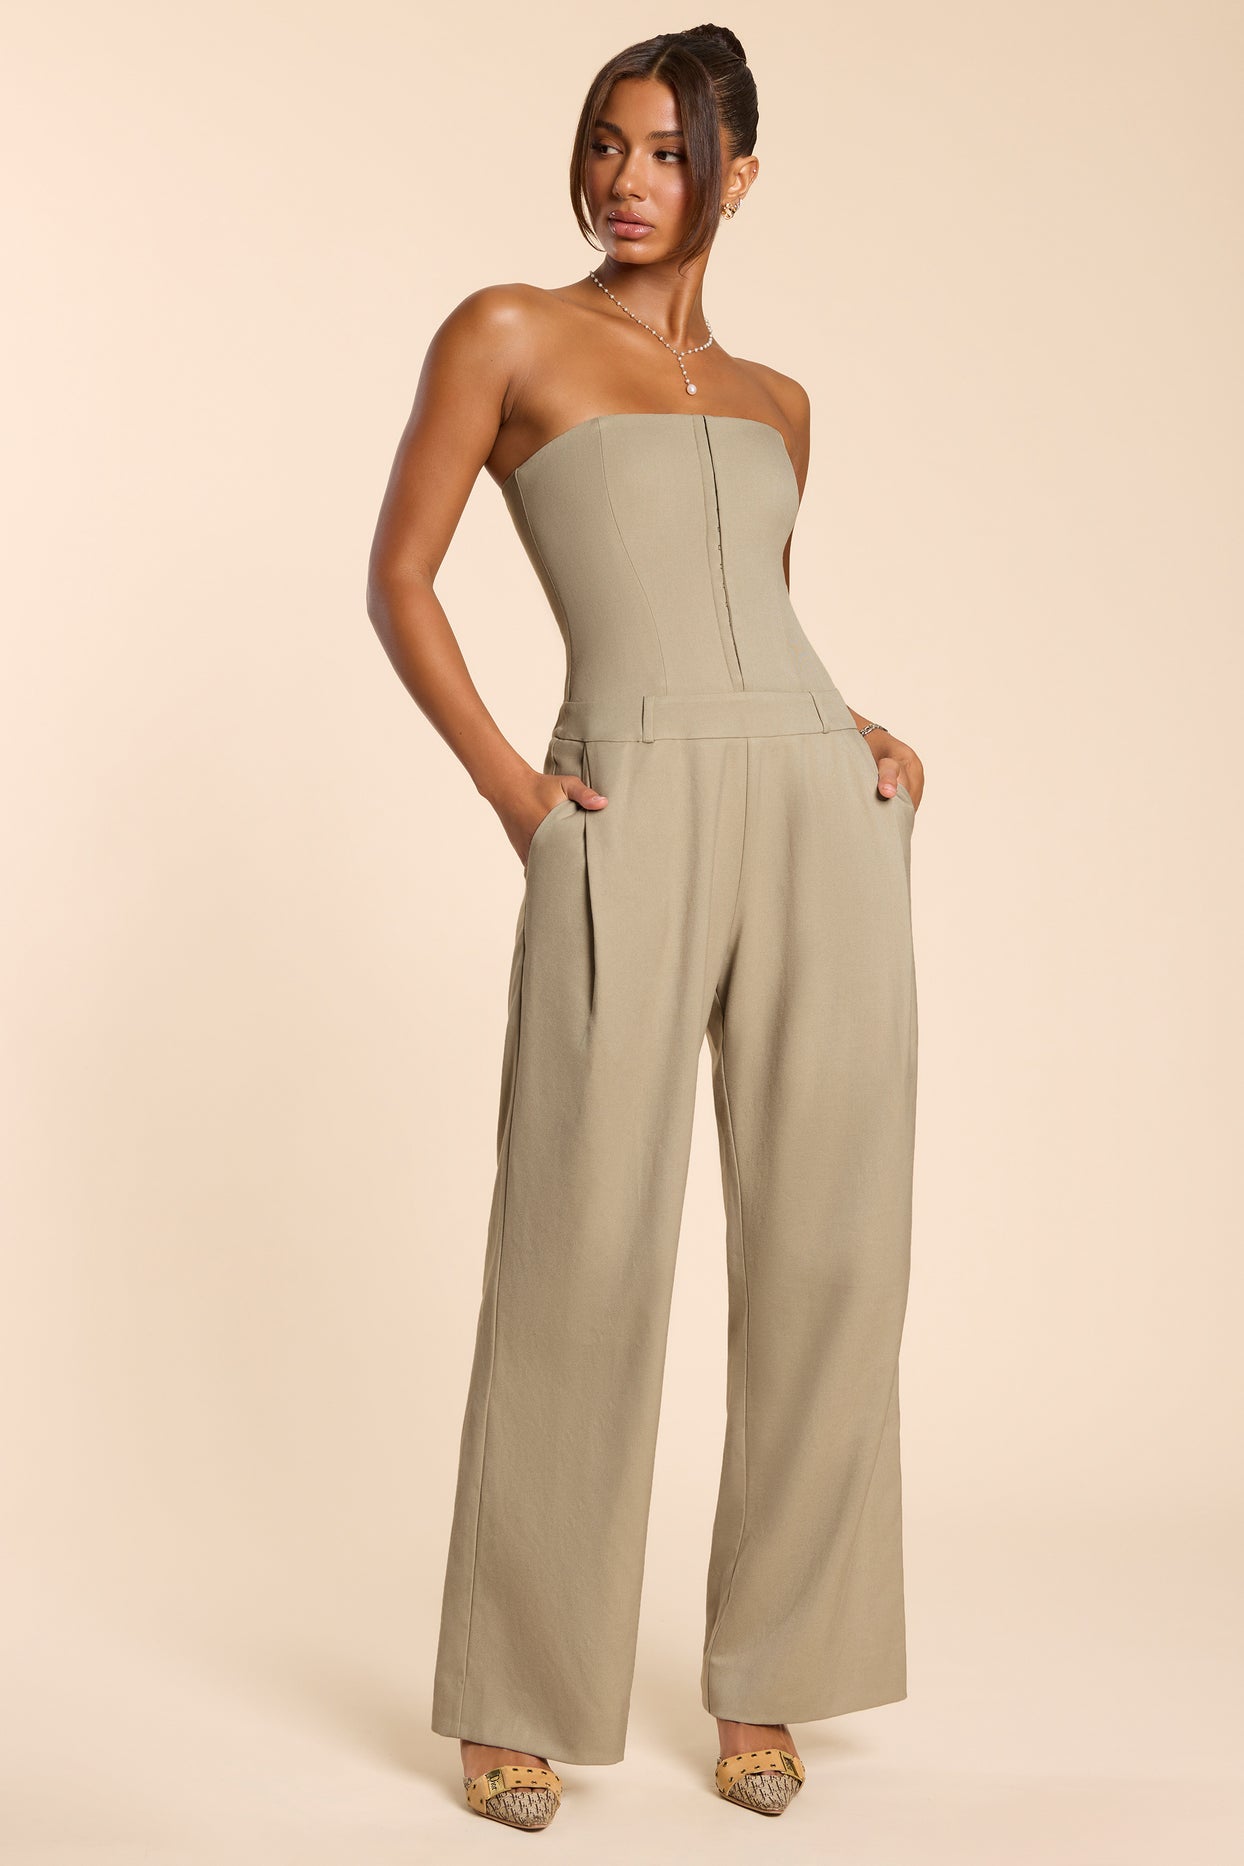 Petite Brushed Twill Bandeau Corset Jumpsuit in Taupe